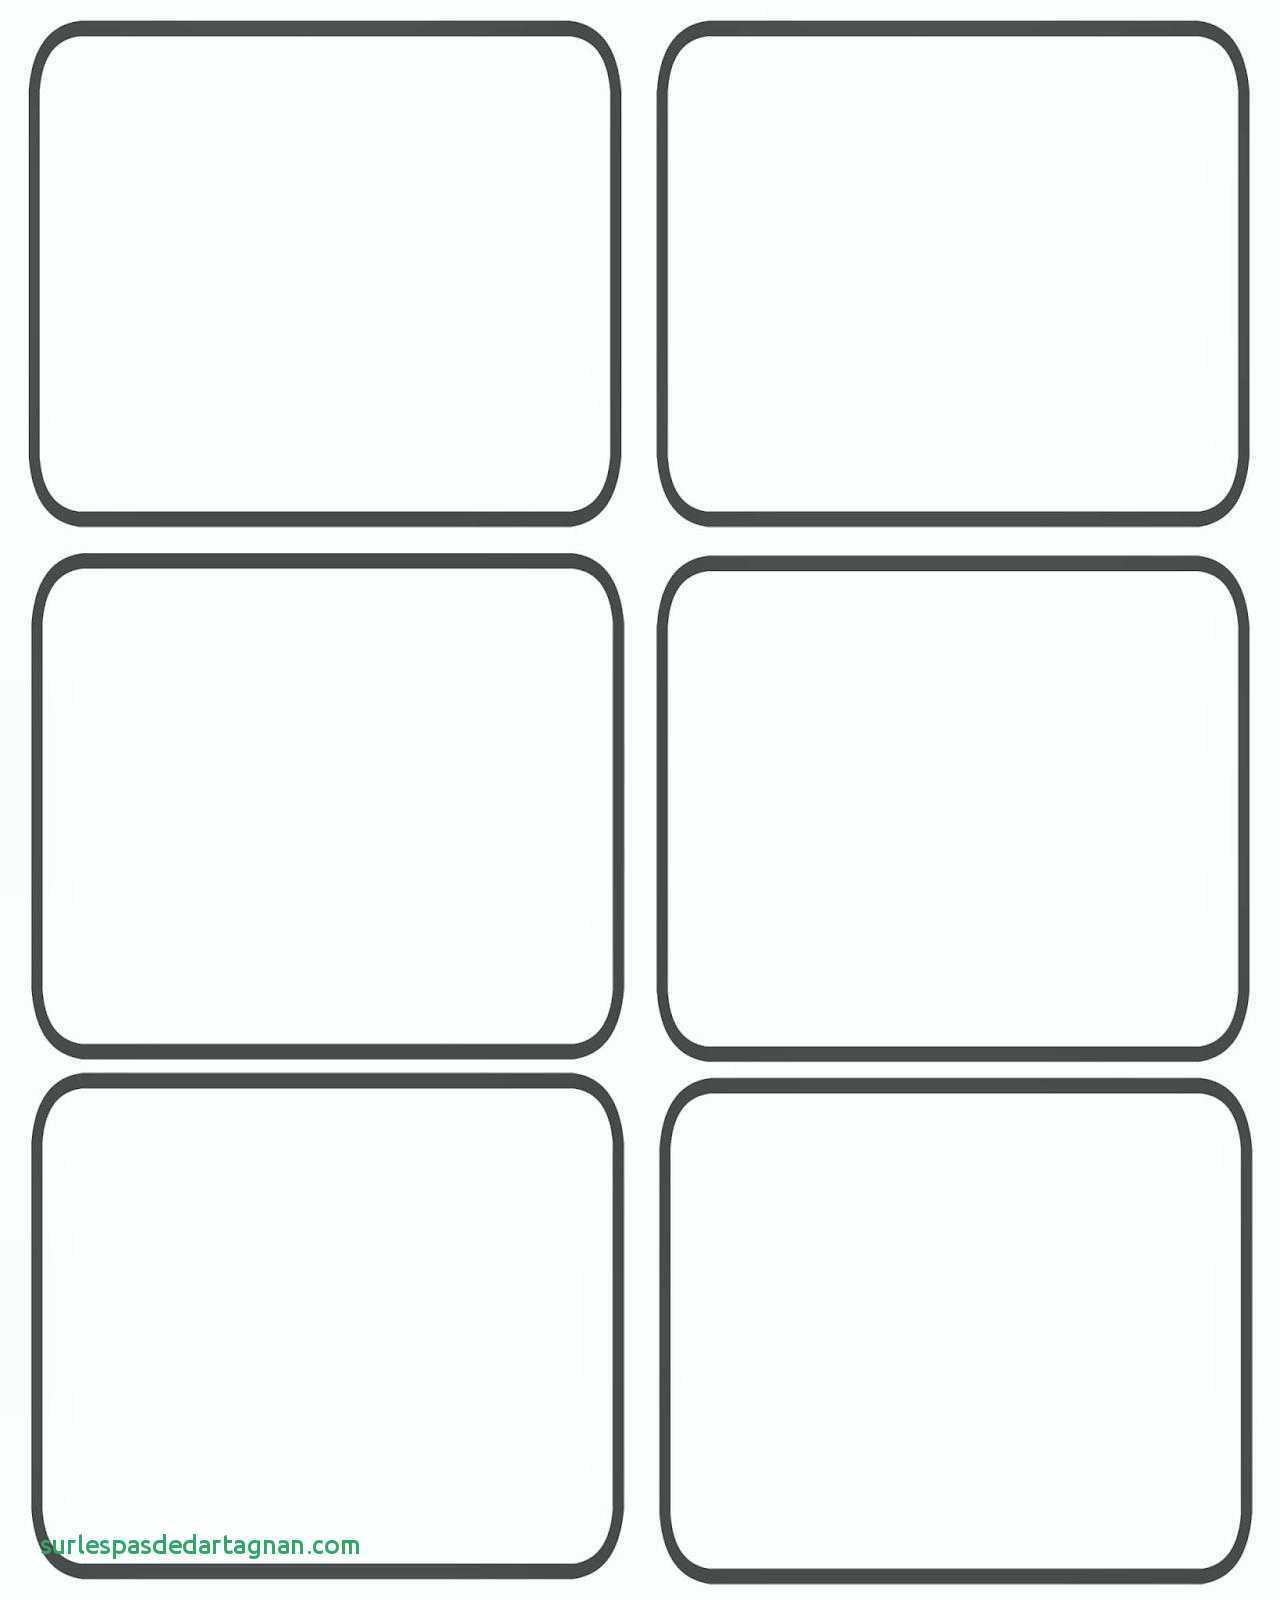 Playing Card Templates Free | C Punkt Pertaining To Blank Playing Card Template